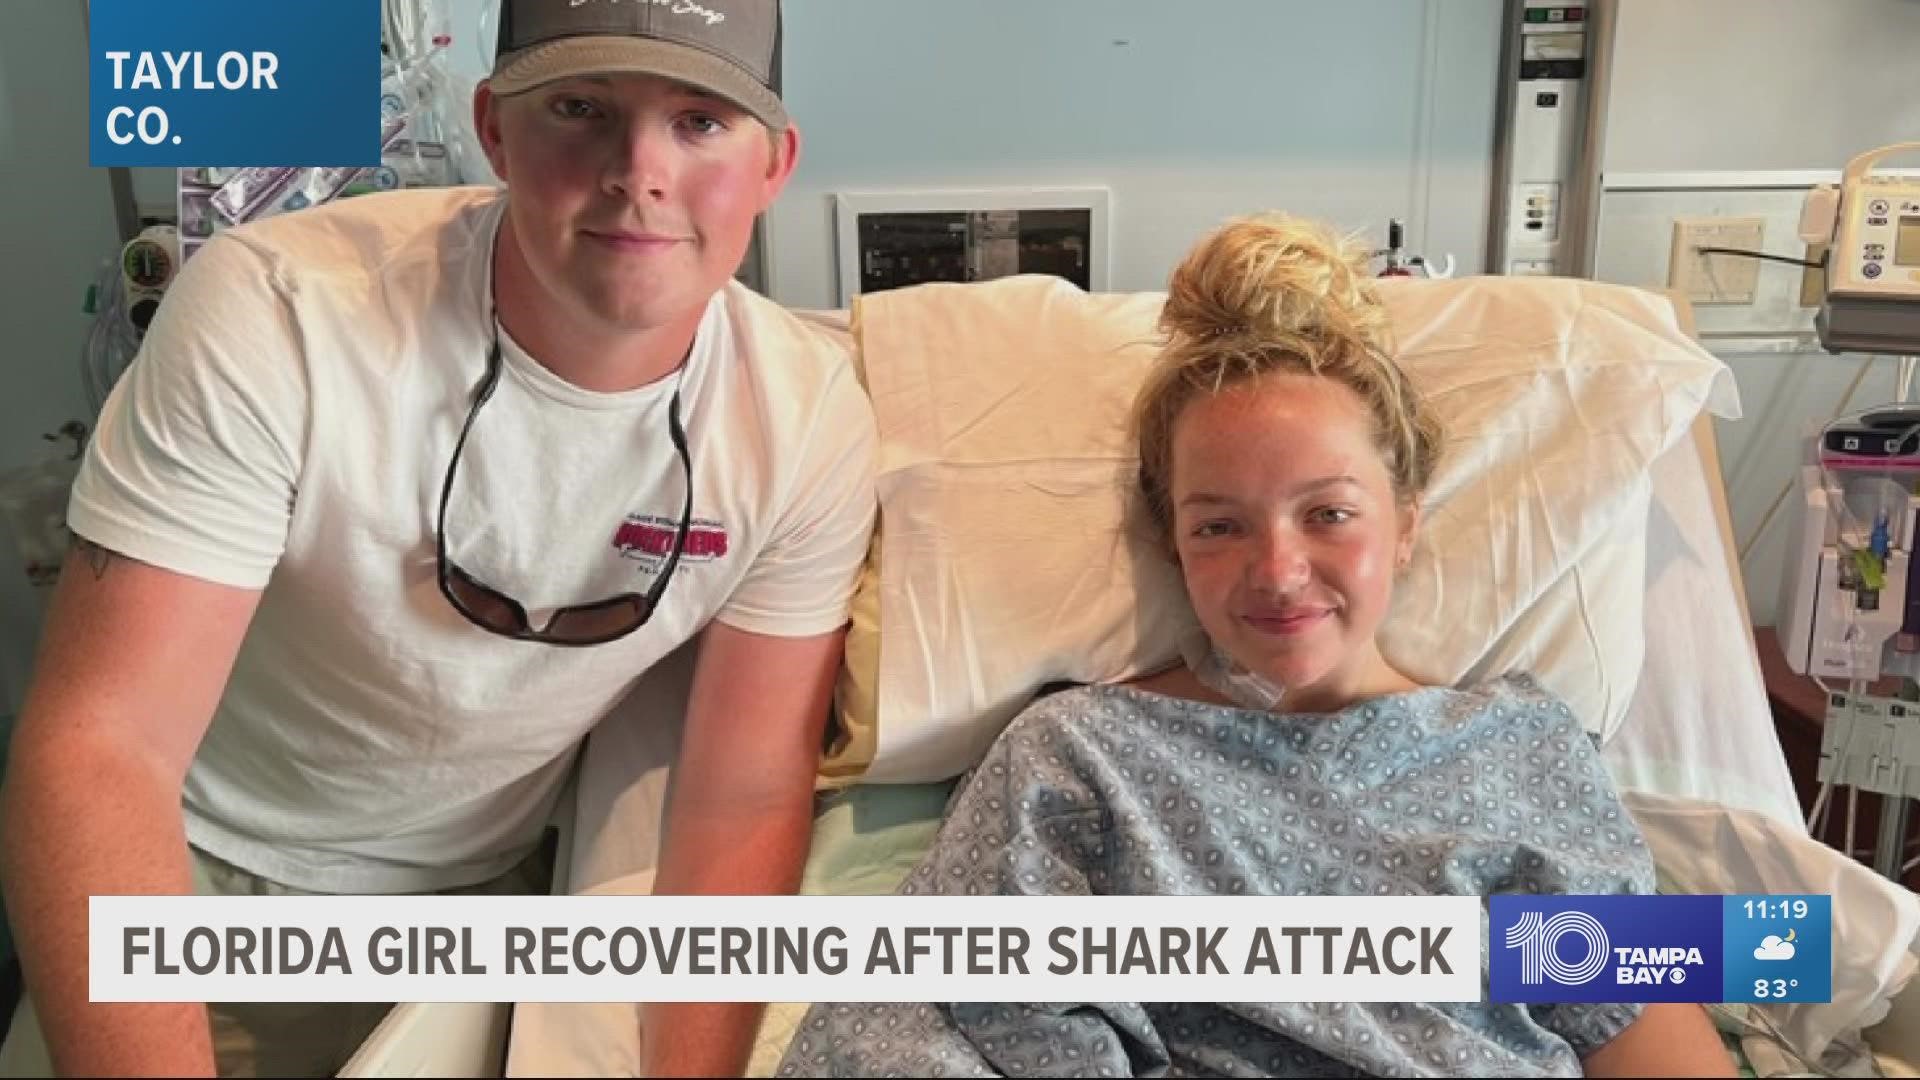 The teen's brother fought off the shark and pulled his sister into a nearby boat, according to the family.